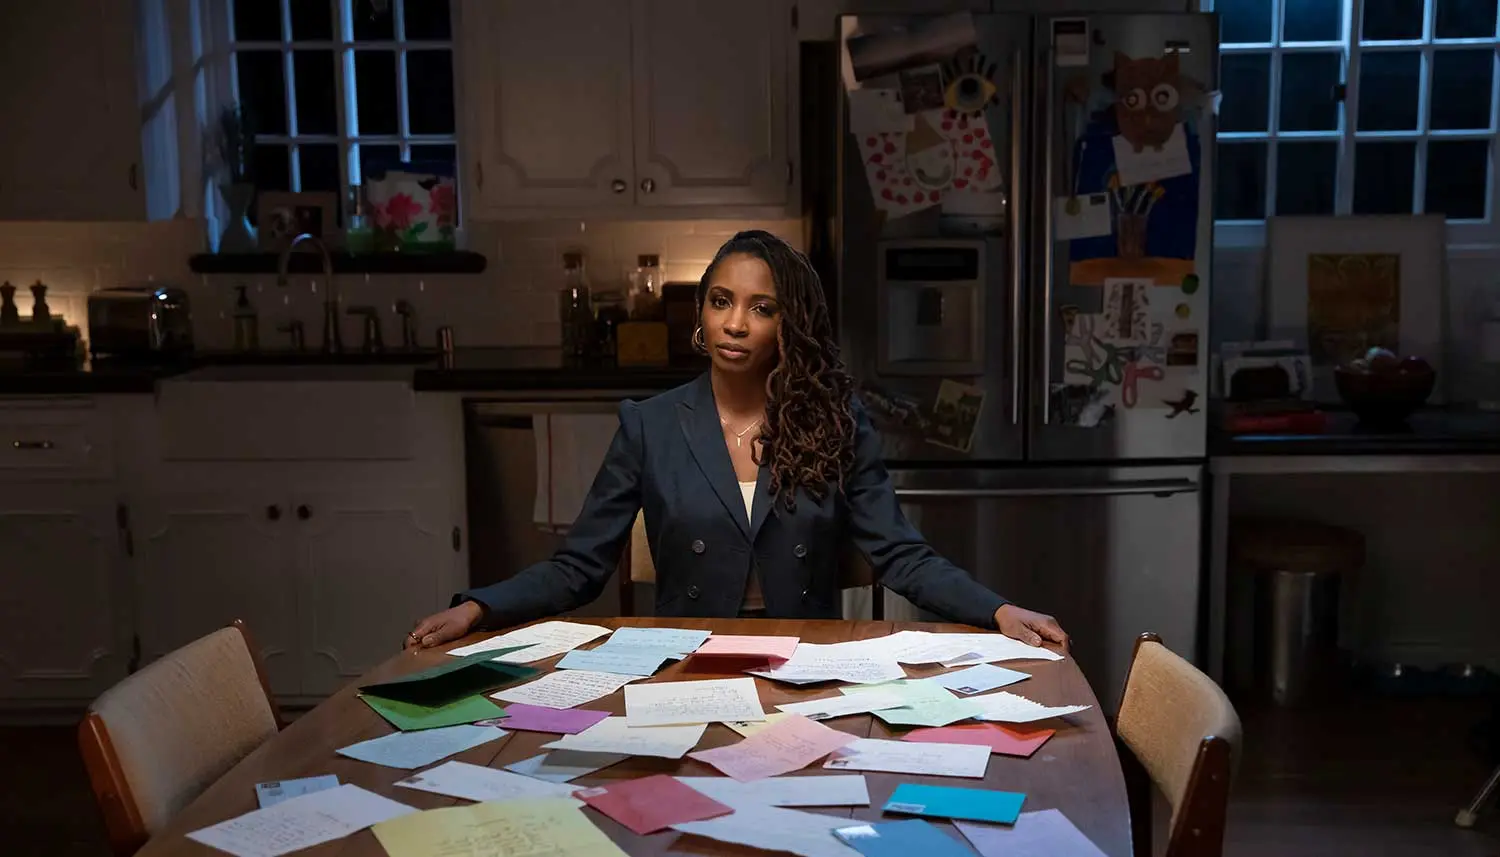 Shanola Hampton at a kitchen table cpvered in letters.